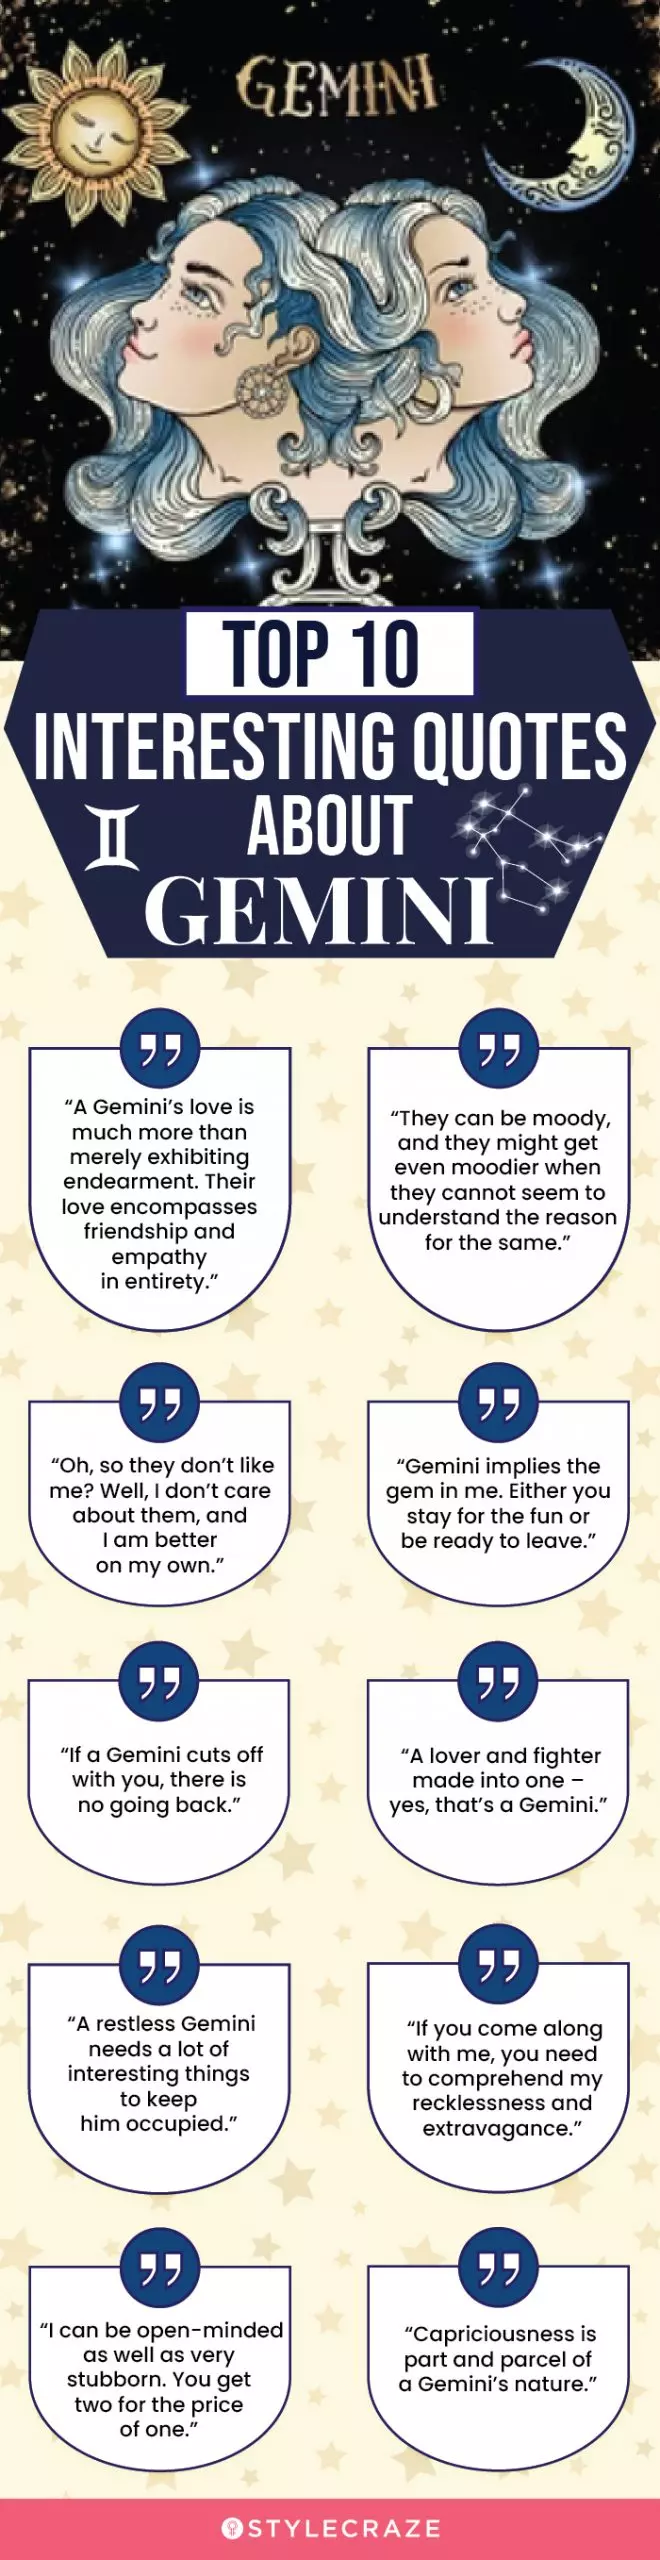 top 10 interesting quotes about gemini (infographic)